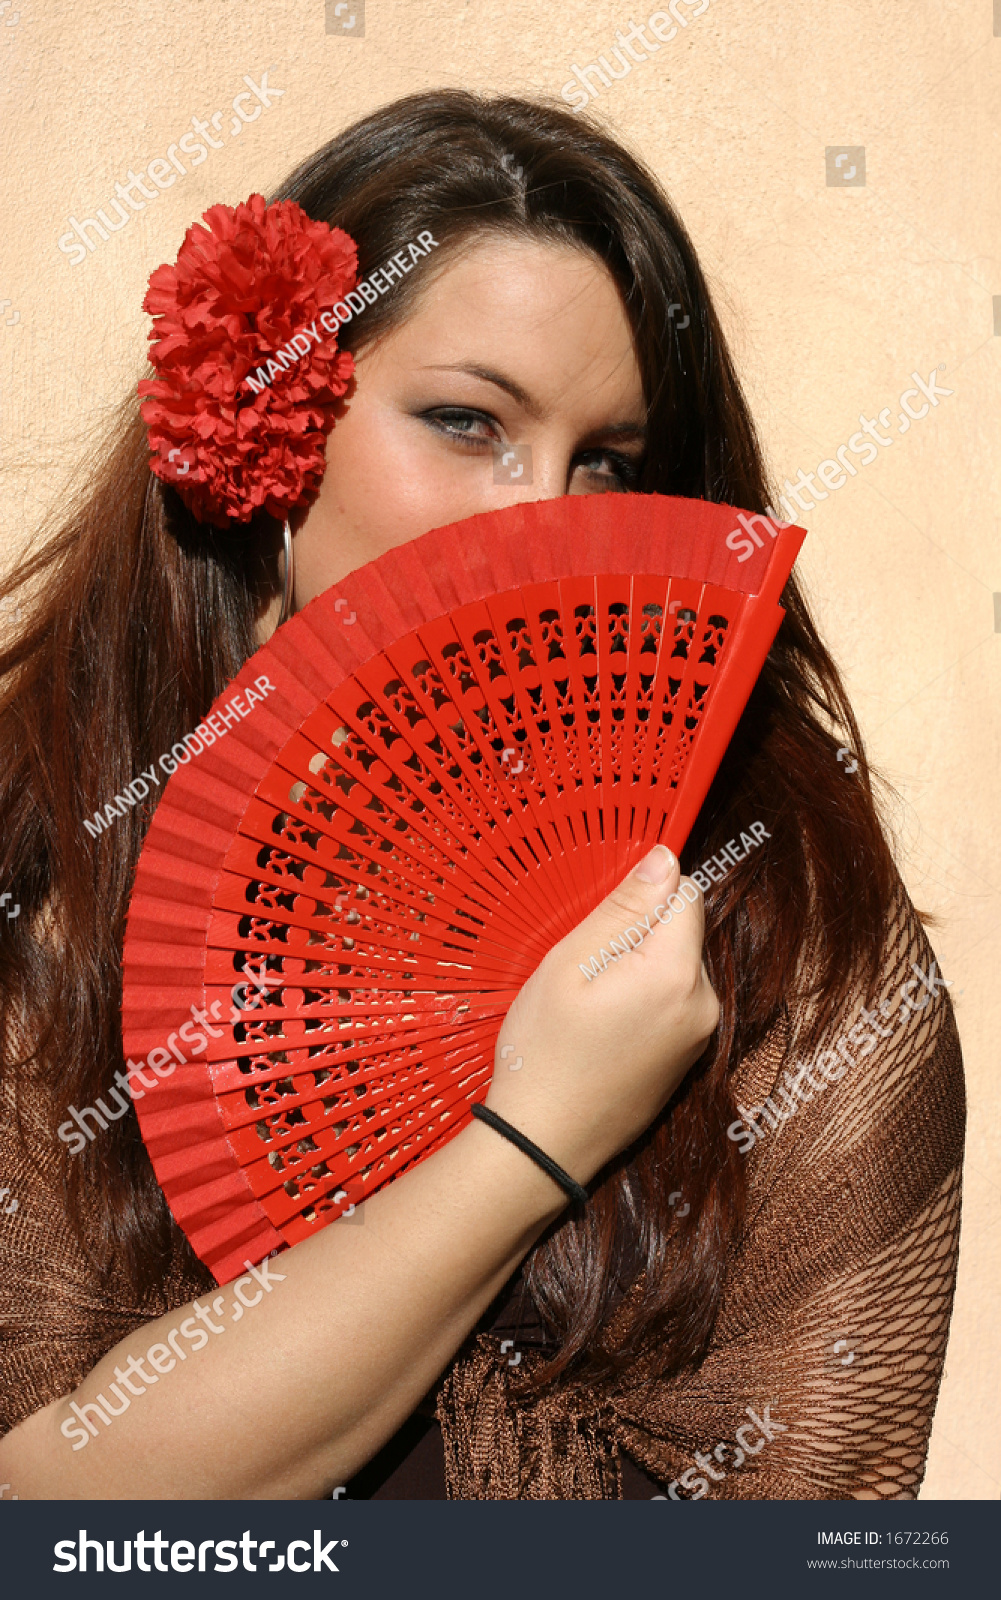 Young Spanish Woman With Red Fan. Stock Photo 1672266 ...